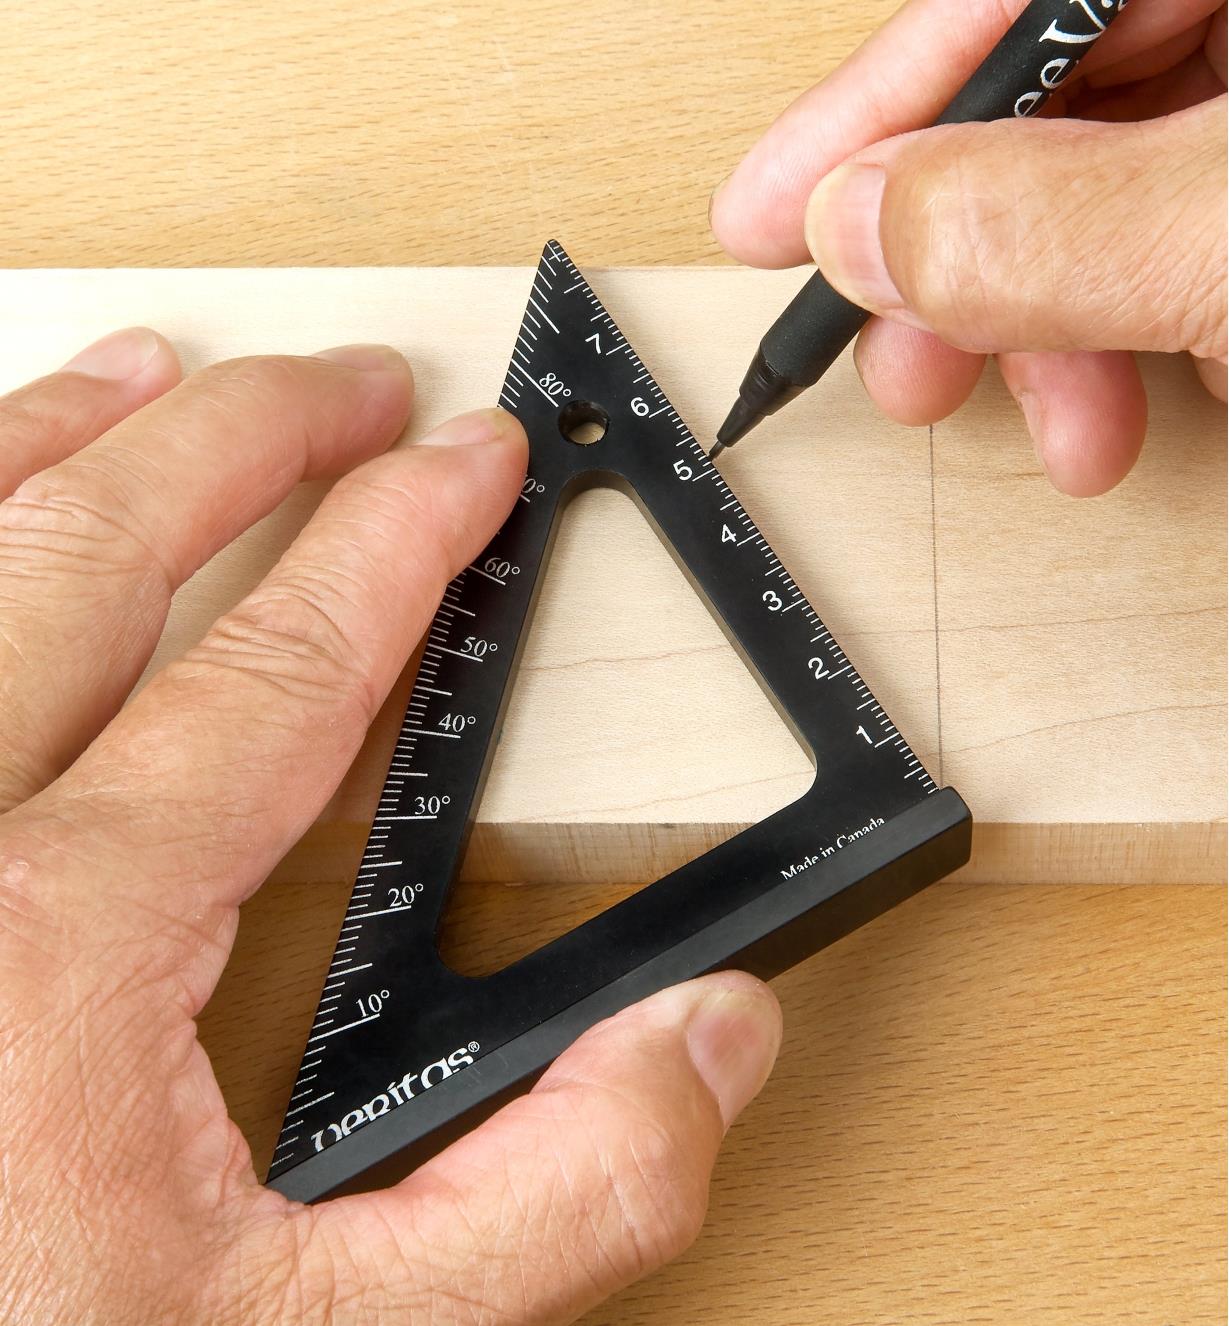 Using the protractor scale marked on a Veritas 85mm Pocket Layout Square to lay out a 30° cut line